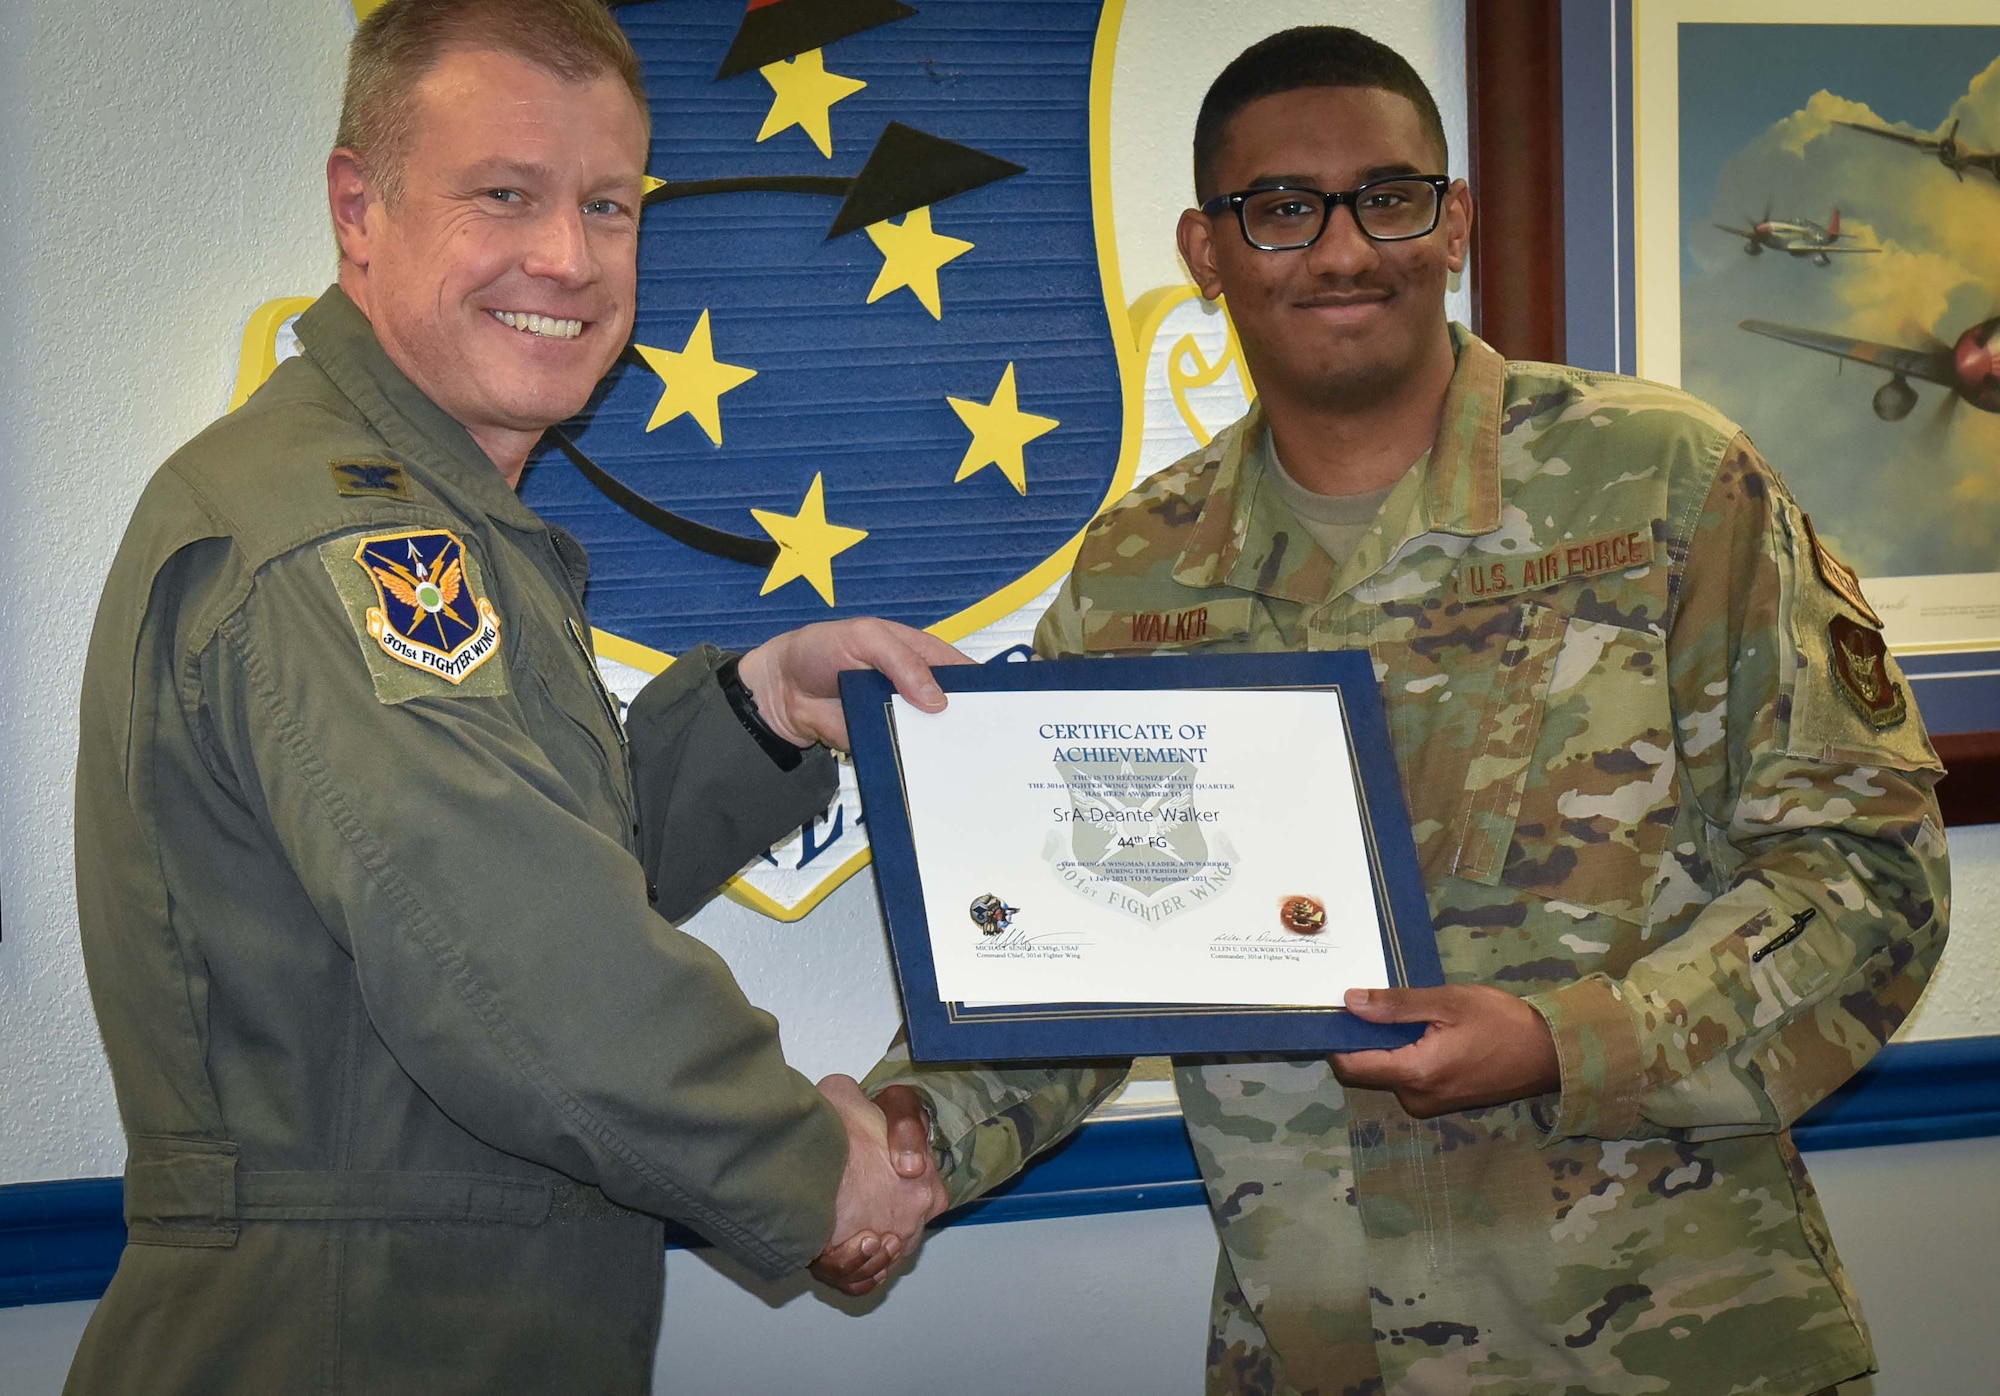 (left) 301st Fighter Wing Commander Col. Allen Duckworth recognizes Senior Airman Deante Walker, 44th Fighter Group Maintenance Squadron F-22 Journeyman during the wing's visit to the 44 FG at Eglin Air Force Base, Fla., March 4. For Walker's dedication and impact, he was selected as the 44 FG and 44 FG MXS Airman of the Year for 2021 as well as being selected as the Airman of the quarter for 3rd quarter 2021. (U.S. Air Force photo by Master Sgt. Jeremy Roman)